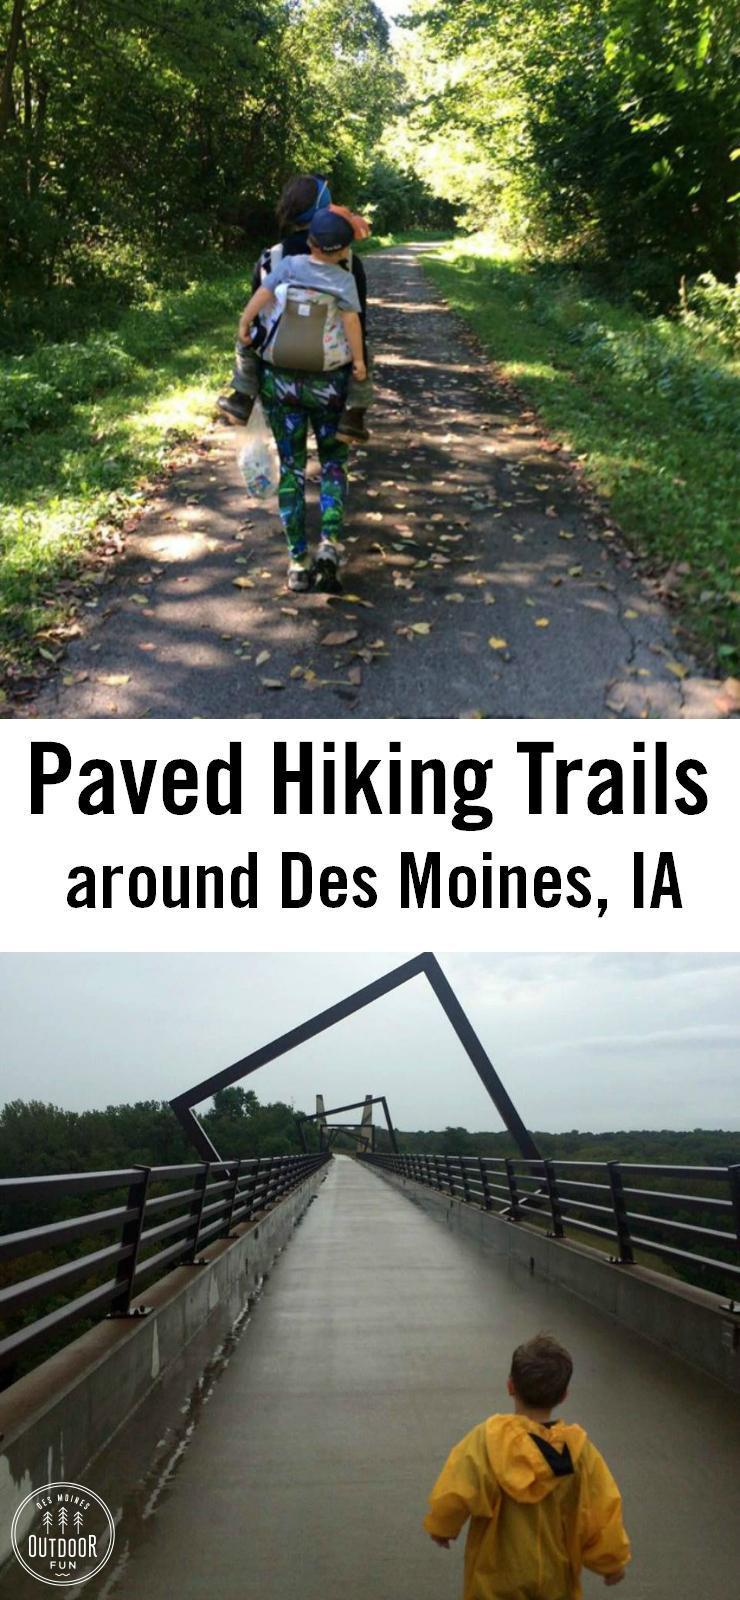 Check out this list of paved hiking trails around Des Moines, Iowa. Great places to hike with strollers, wheelchairs, or early walkers in Central Iowa.